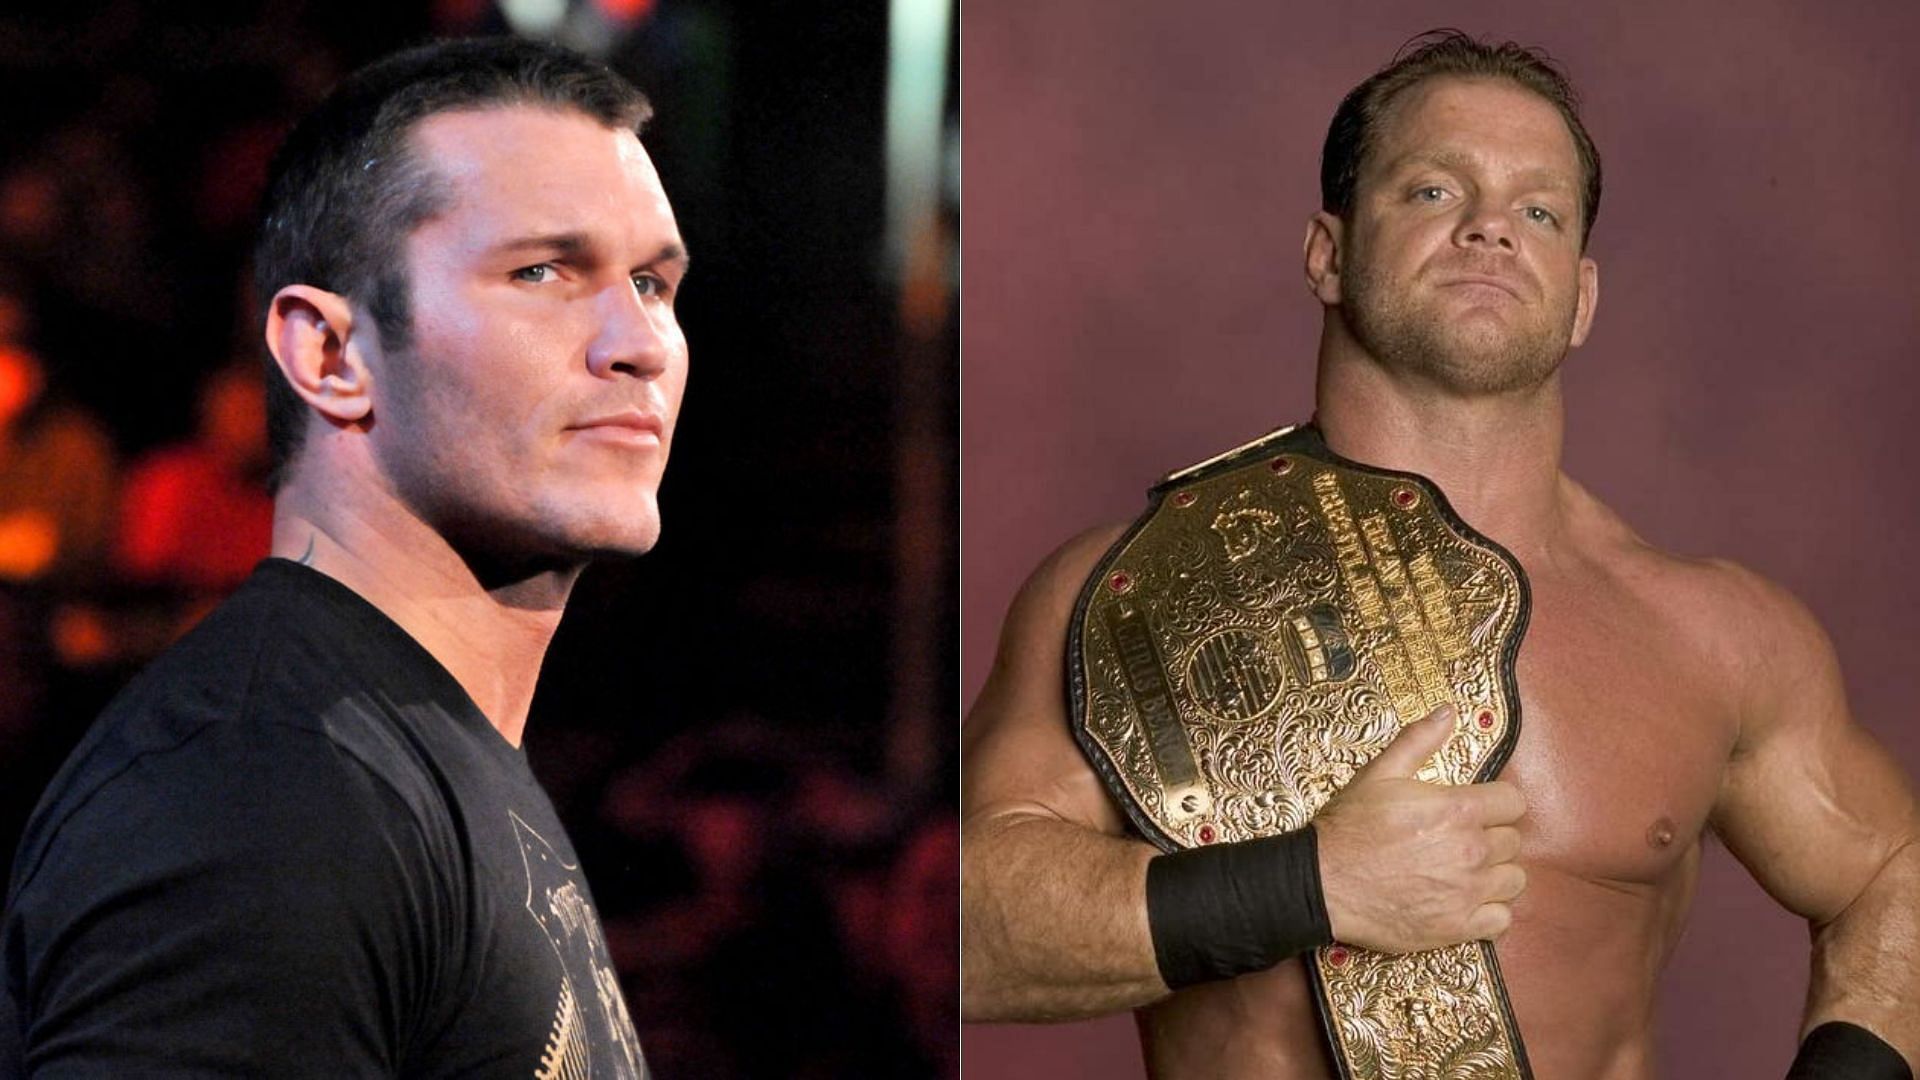 Randy Orton (left) feuded with Chris Benoit (right) in 2004.